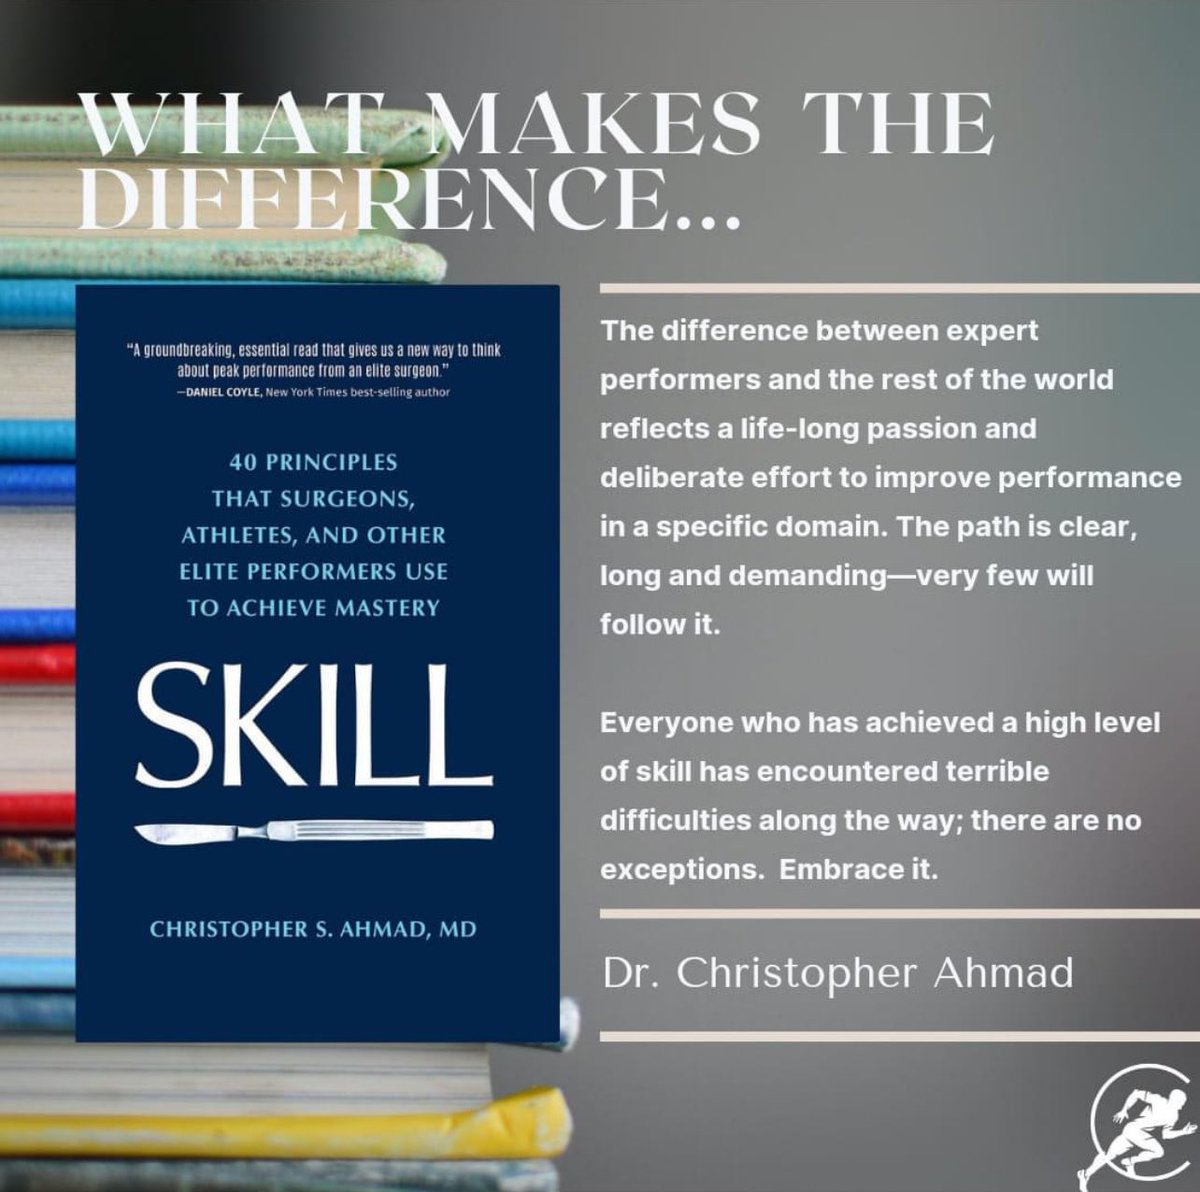 I often get asked, what makes the difference... SKILL: The Book a.co/d/8l3lwlN 📘 Visit my Website: drahmadsportsmedicine.com ✅ #skill #mastery #performance #repetition #practice #training #differencemakers 🏆🏆